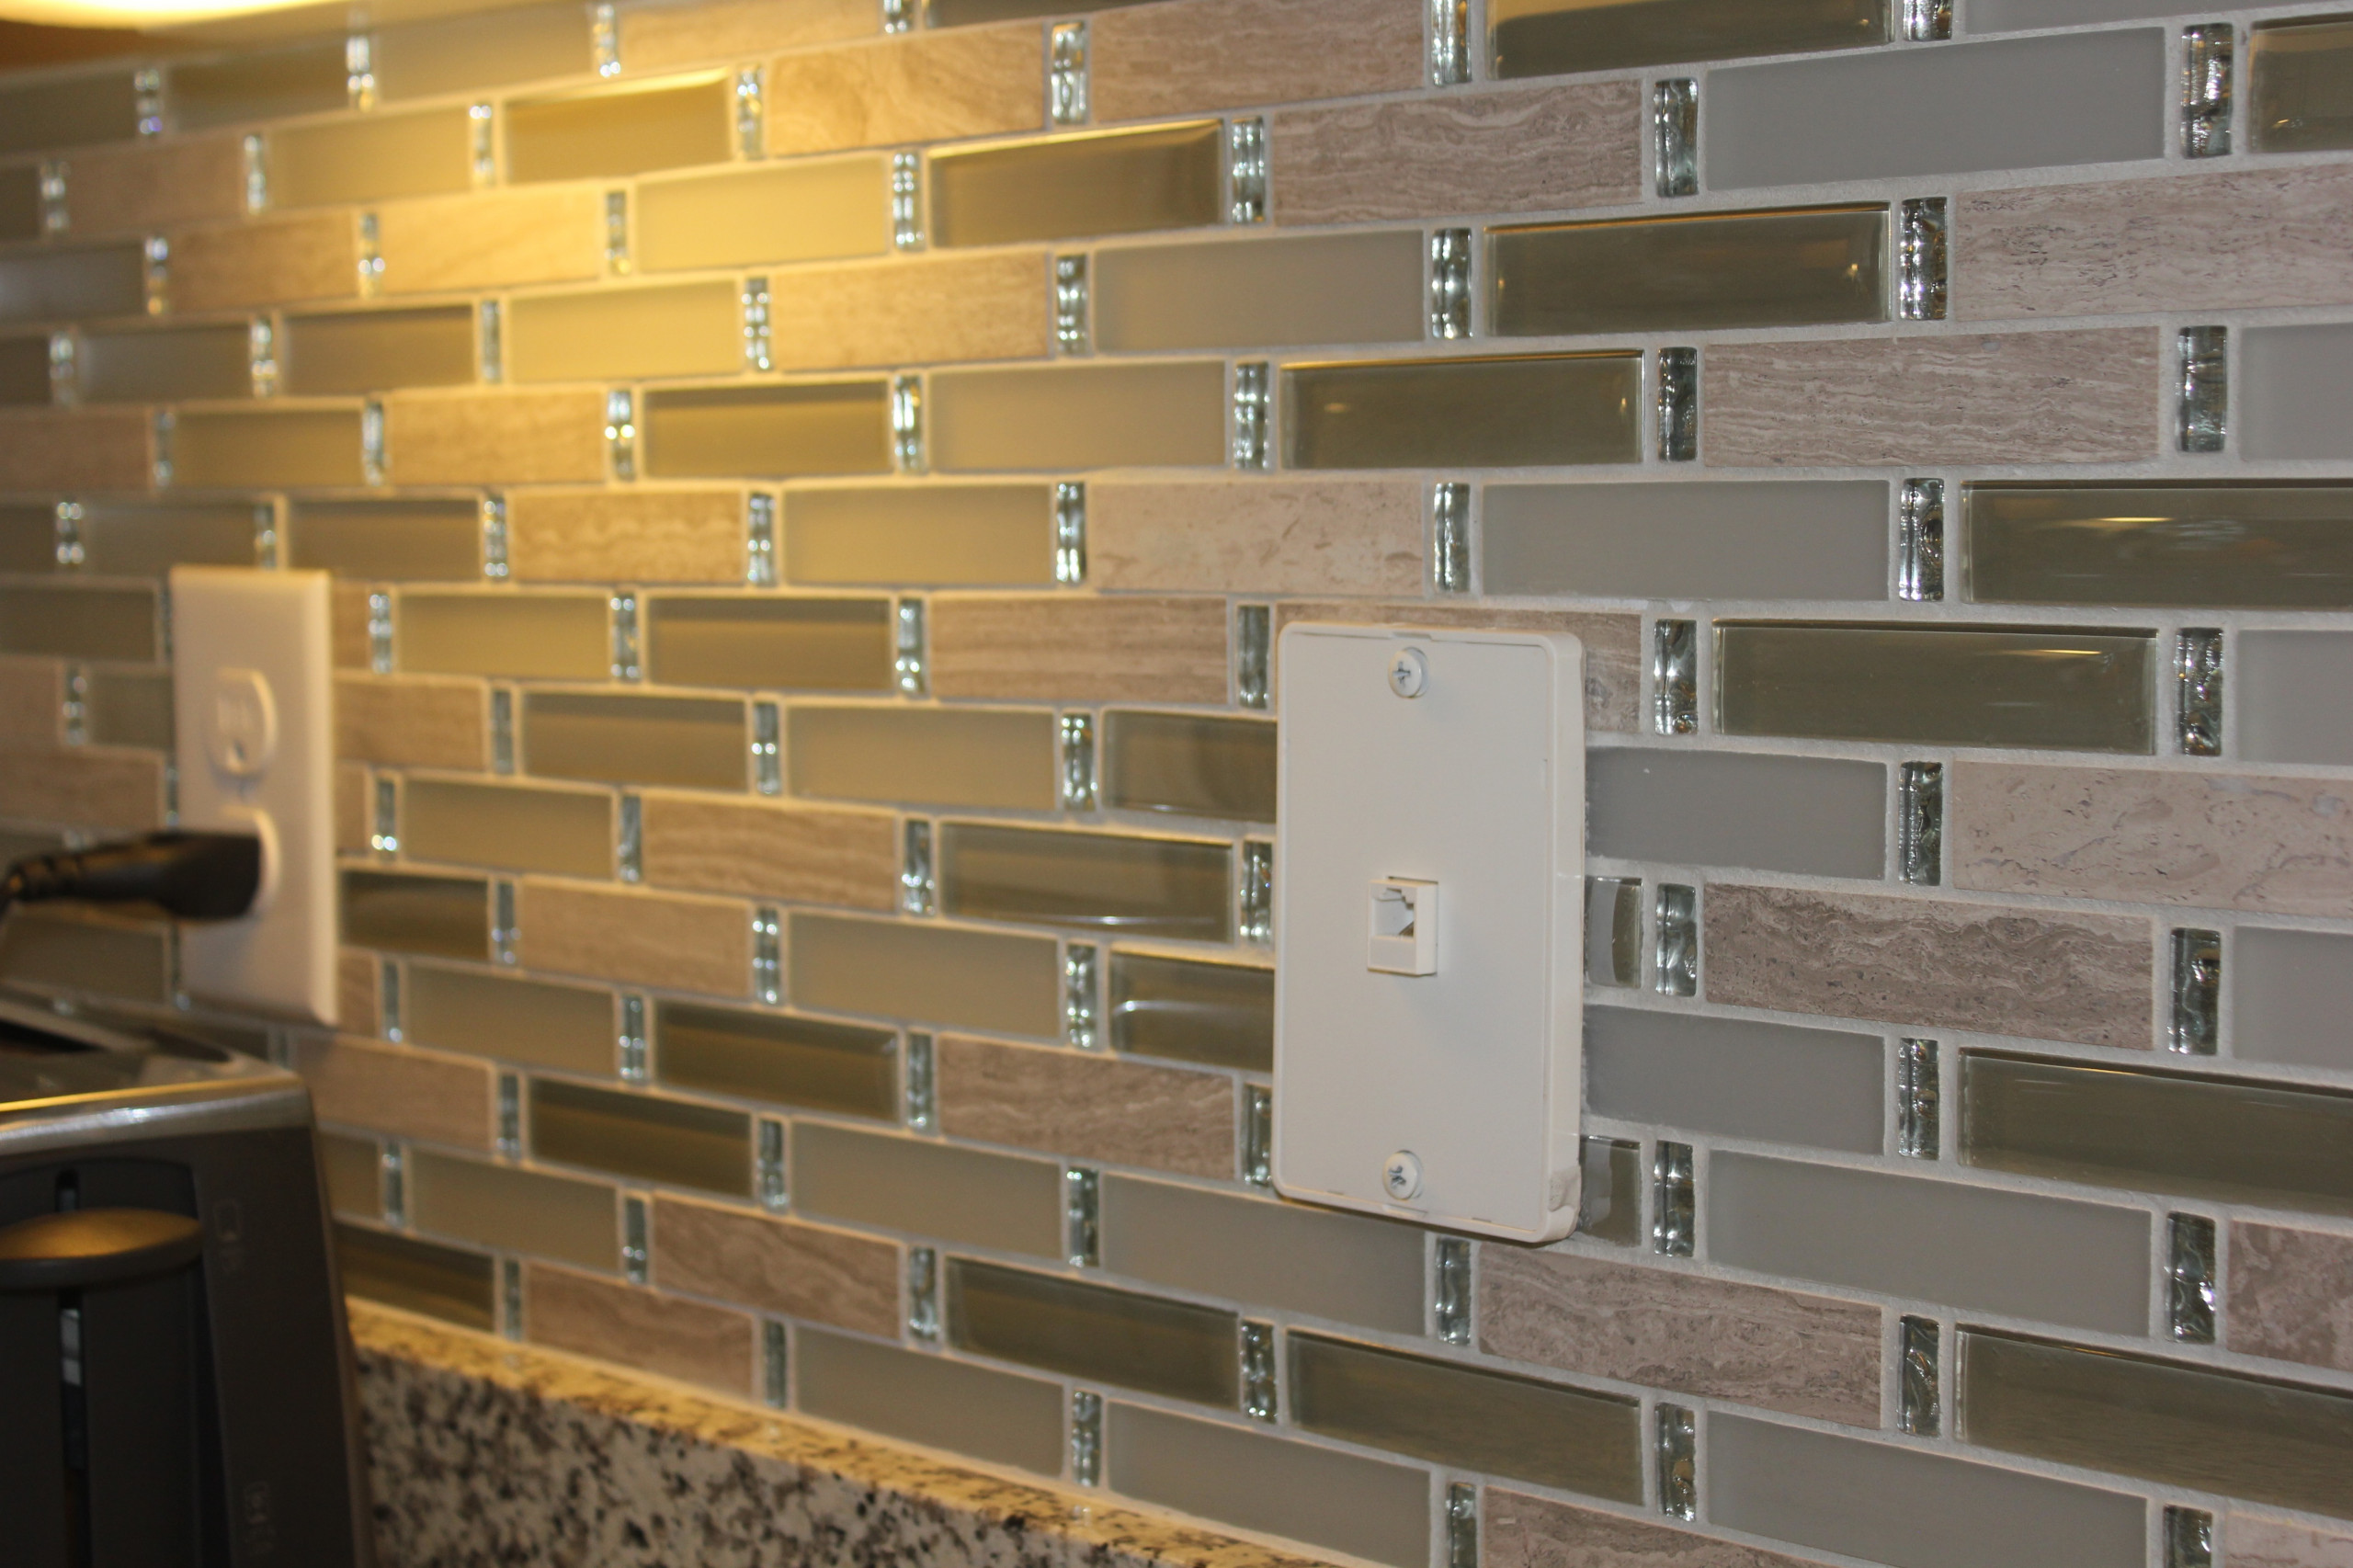 Tile backsplash with bling was added above the kitchen counters